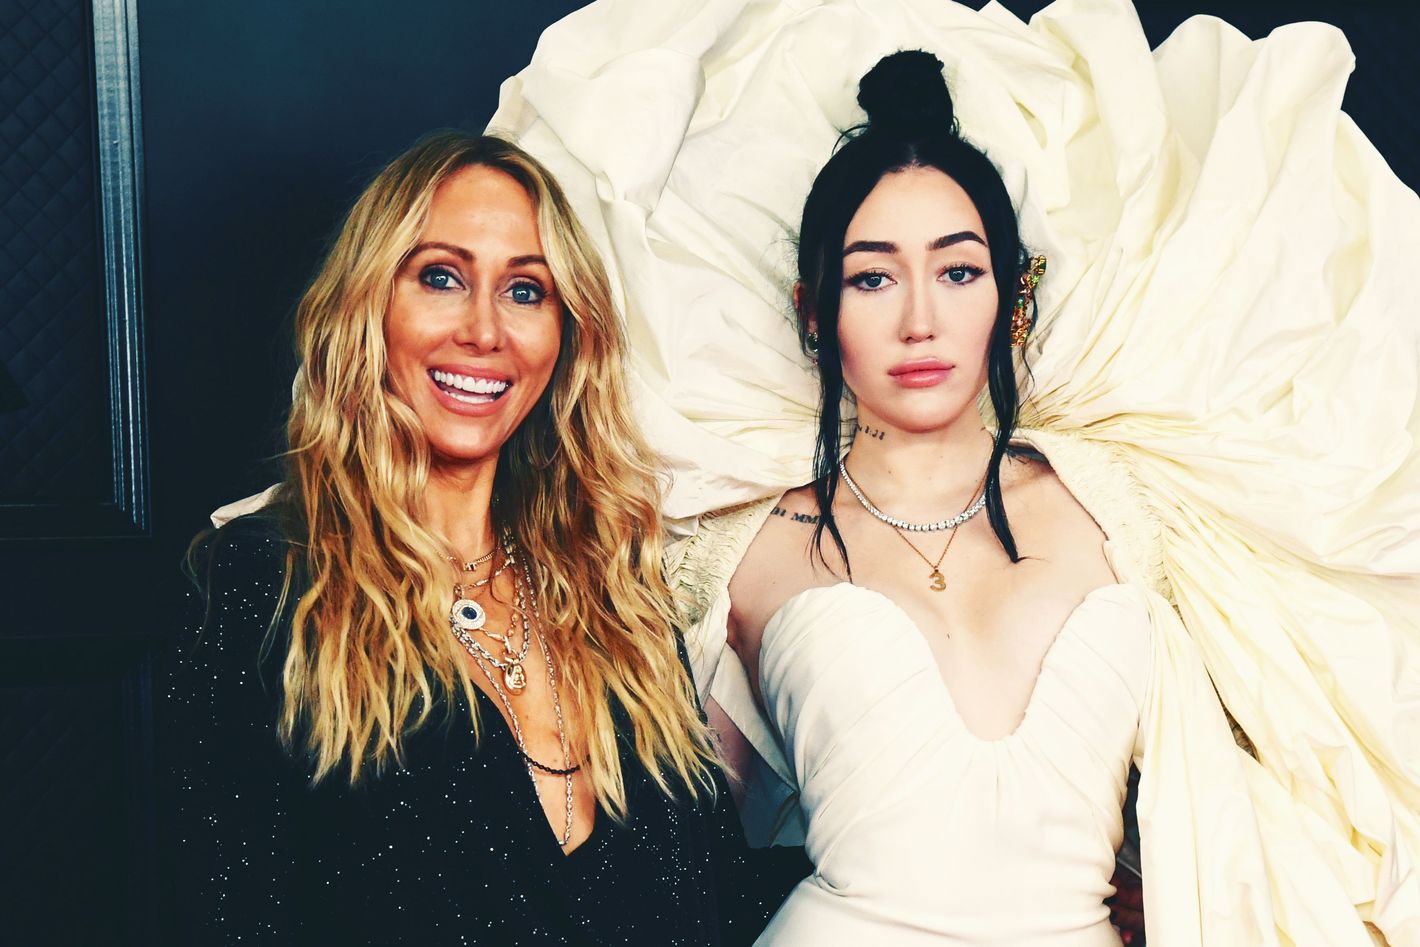 Noah Cyrus Would Rather Not Talk About Those Tish Rumors